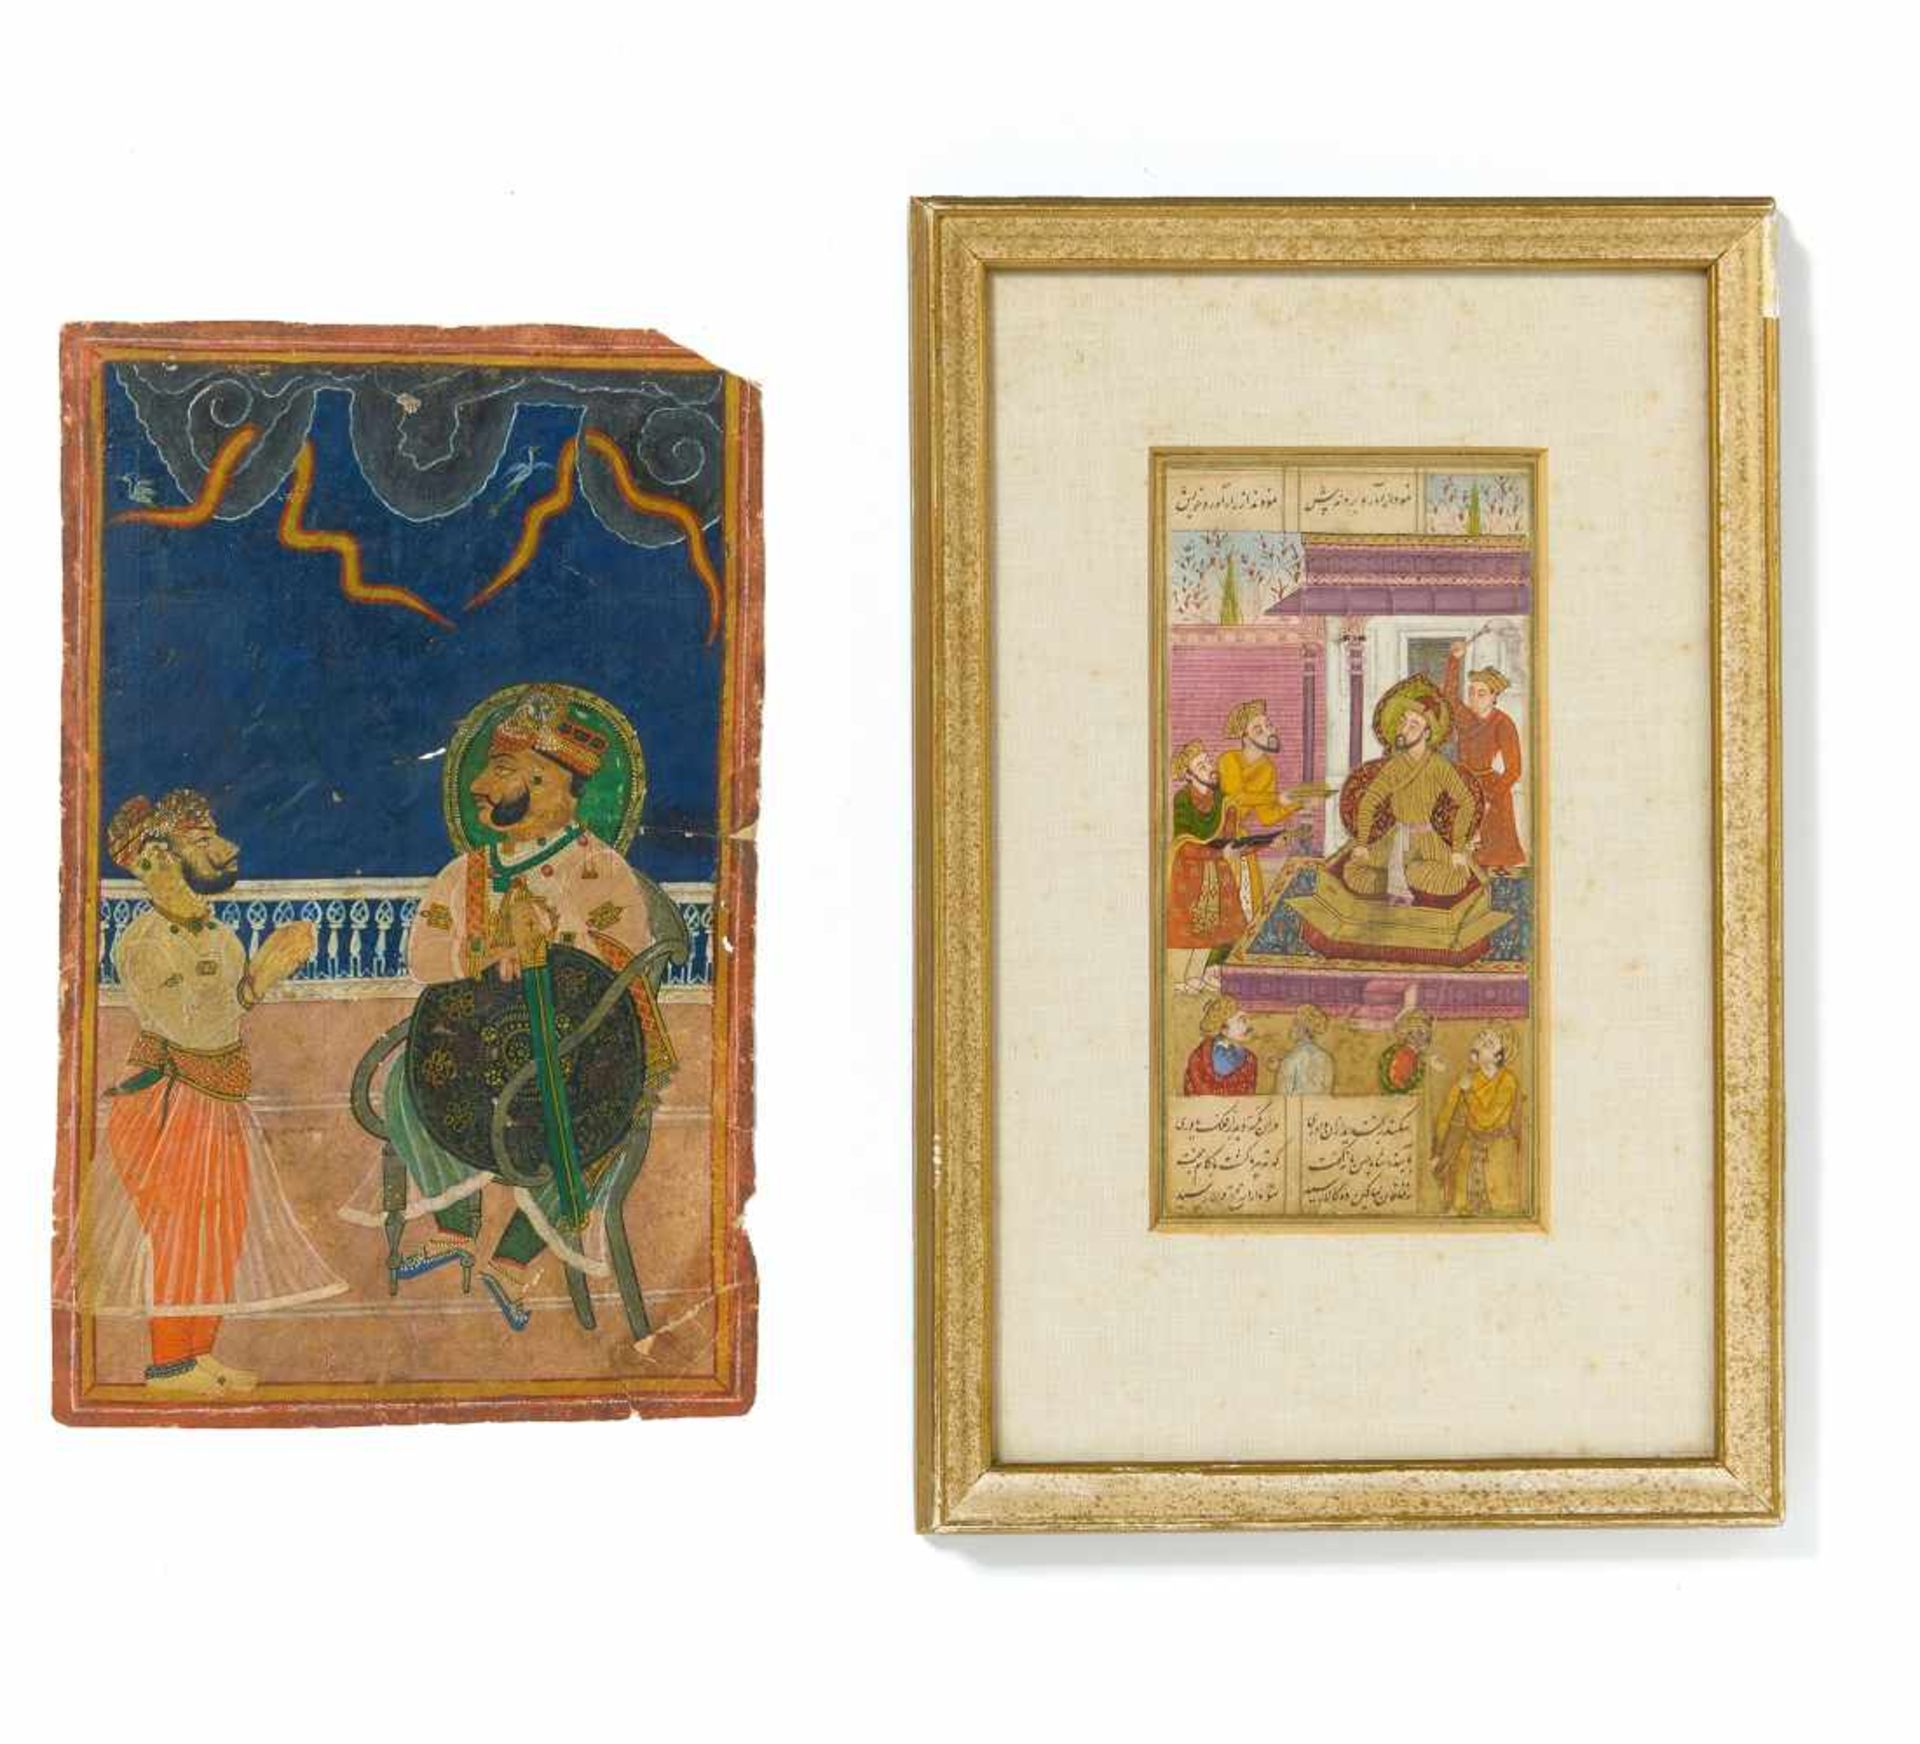 TWO PAINTINGS WITH MAHARAJA. Mughal India. 18th/19th c. Pigments and gold leaf on paper. a) Two